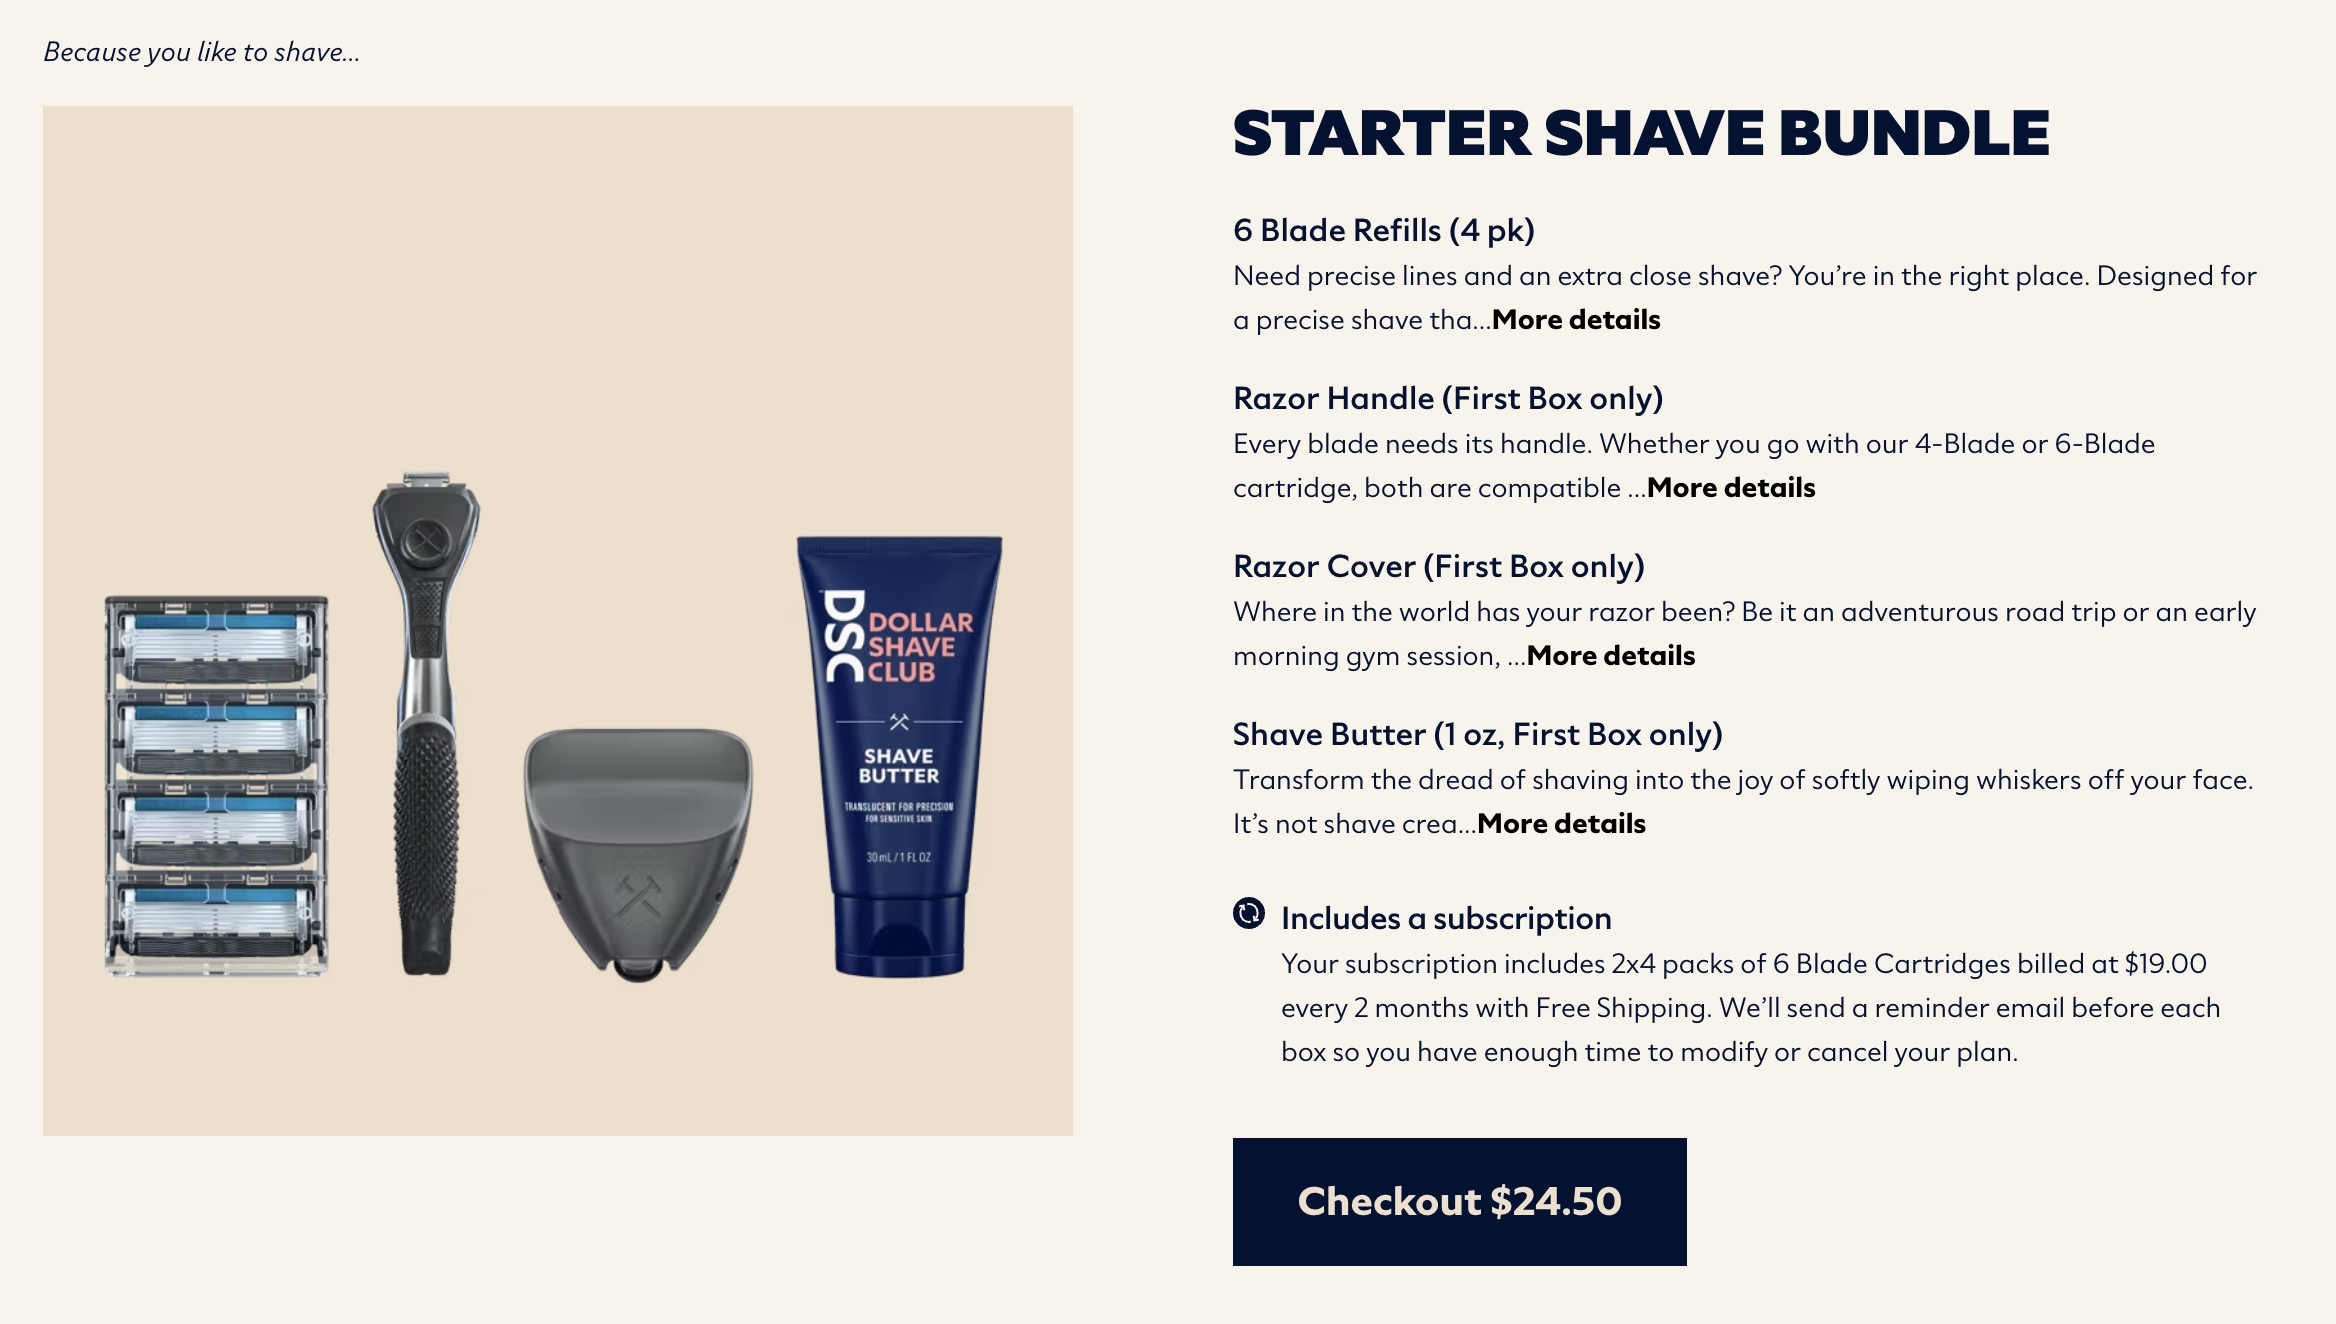 Dollar Shave Club - a replenishment subscription box for men's grooming needs